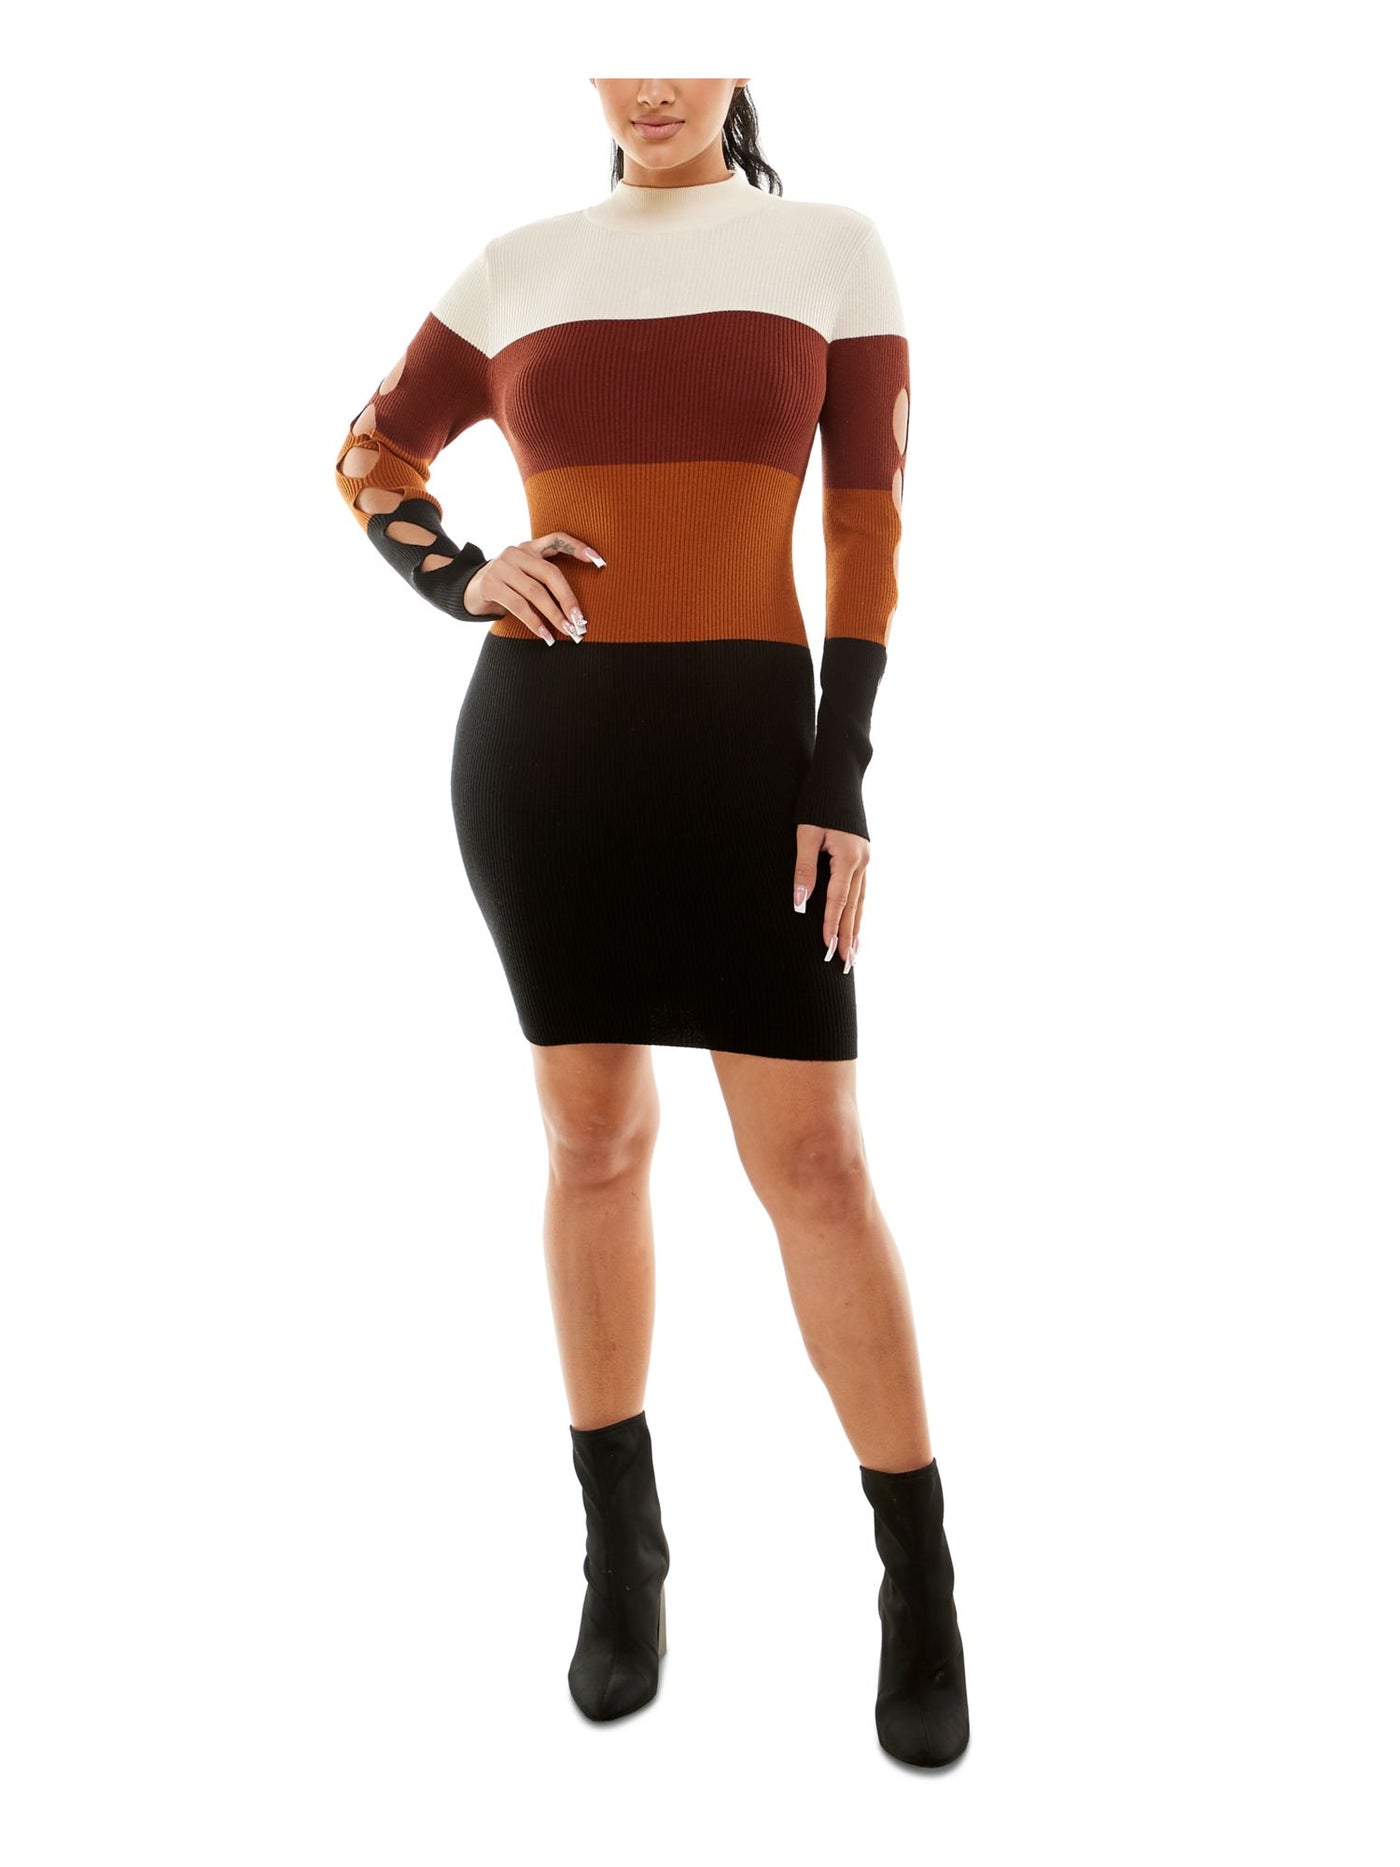 PLANET GOLD Womens Brown Striped Long Sleeve Mock Neck Above The Knee Sweater Dress Juniors XS